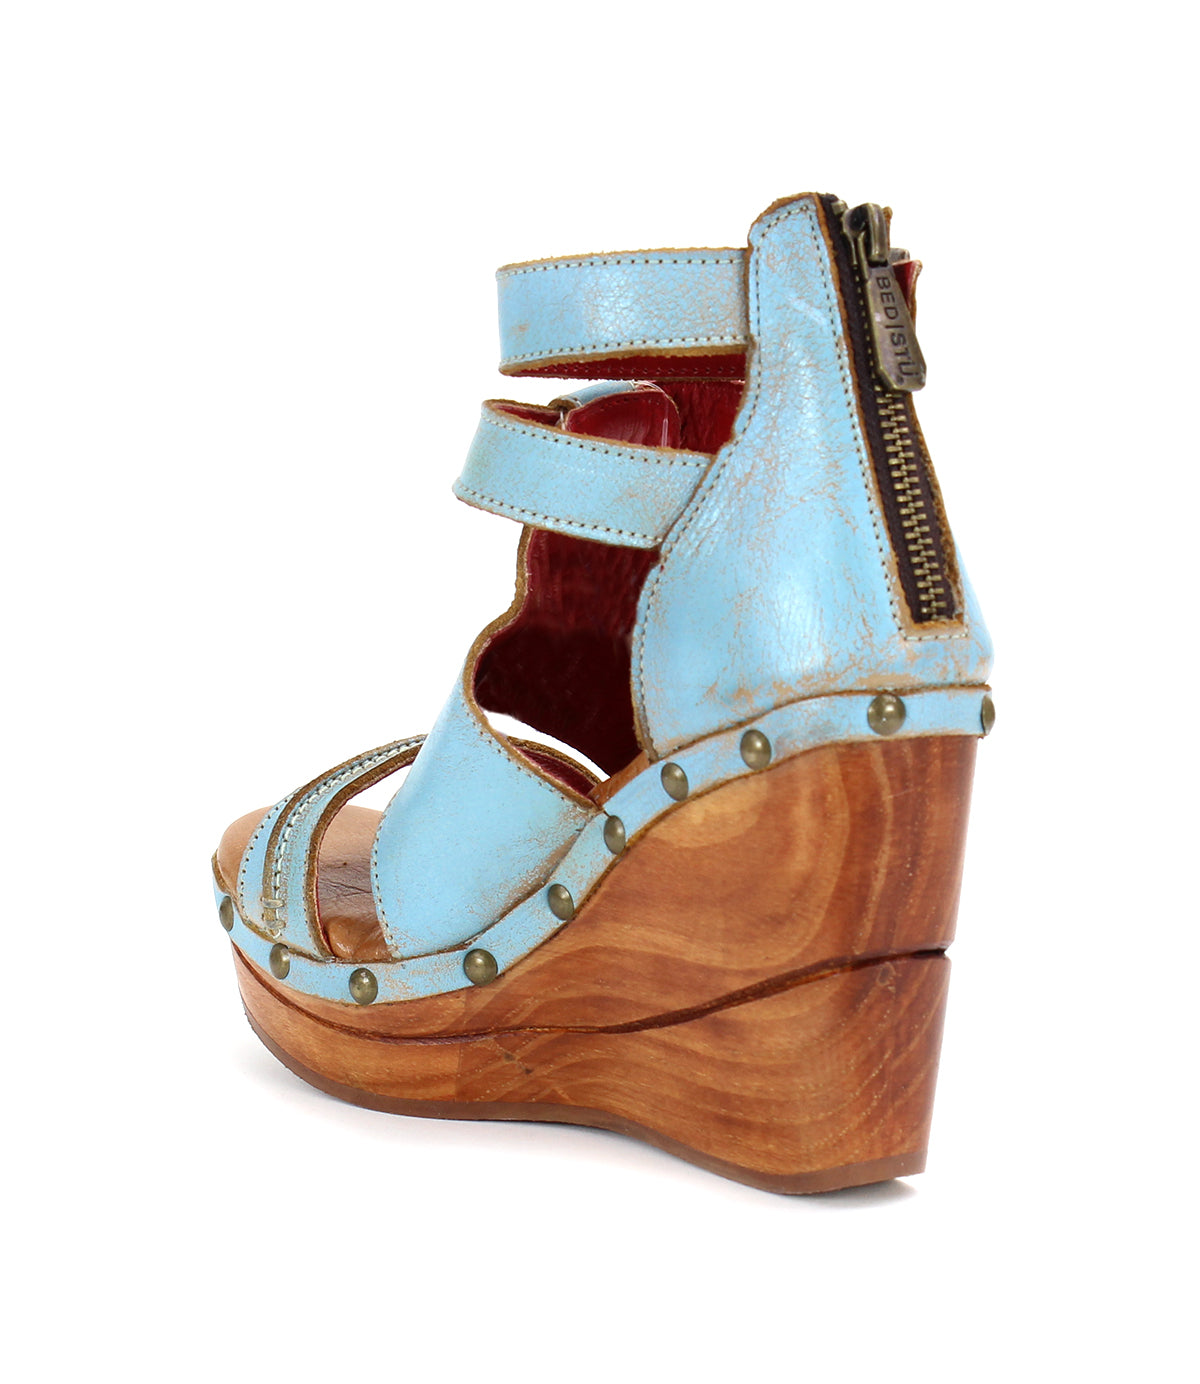 A sustainable wooden wedge sandal with woven strappy uppers in a lovely shade of blue, fit for the Bed Stu Princess.